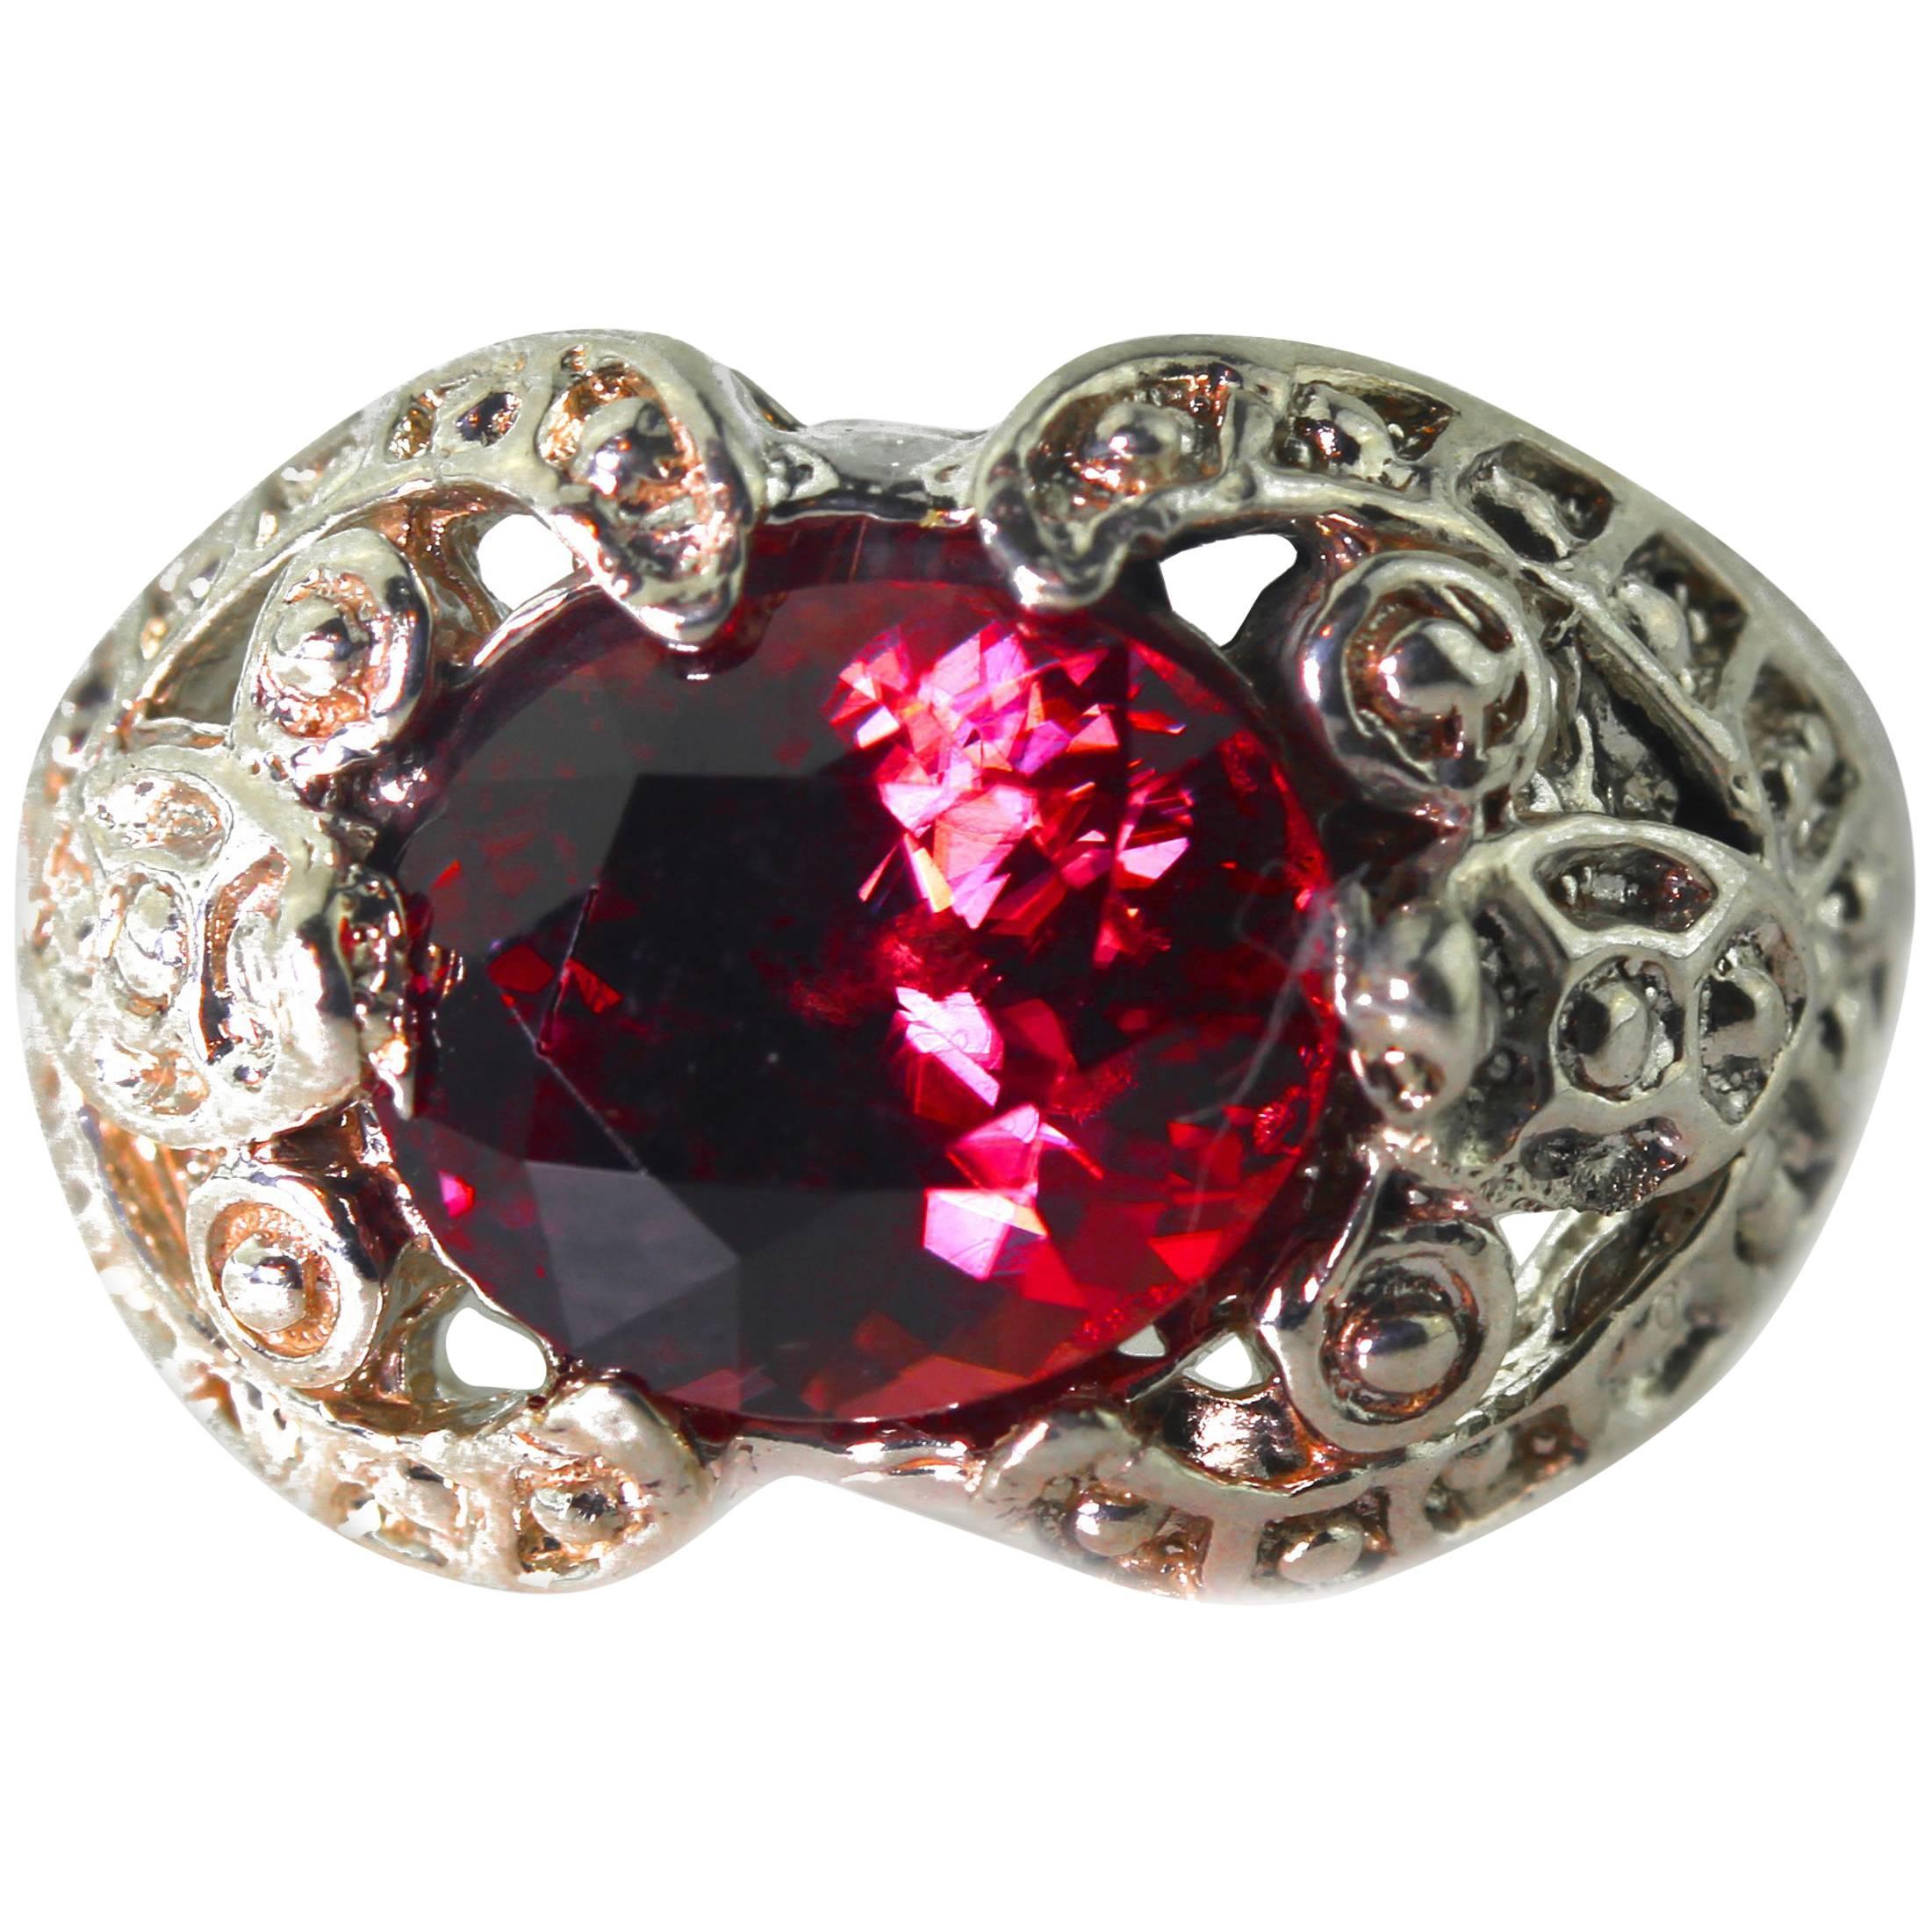 Brilliant glittering rare natural reflective red Zircon (6.4 carats - 10.9 mm x 8.9 mm)) nestled elegantly in a unique handmade beautiful sterling silver ring size 7 (sizable). This goes happily from daytime to evening occasions. If you wish faster